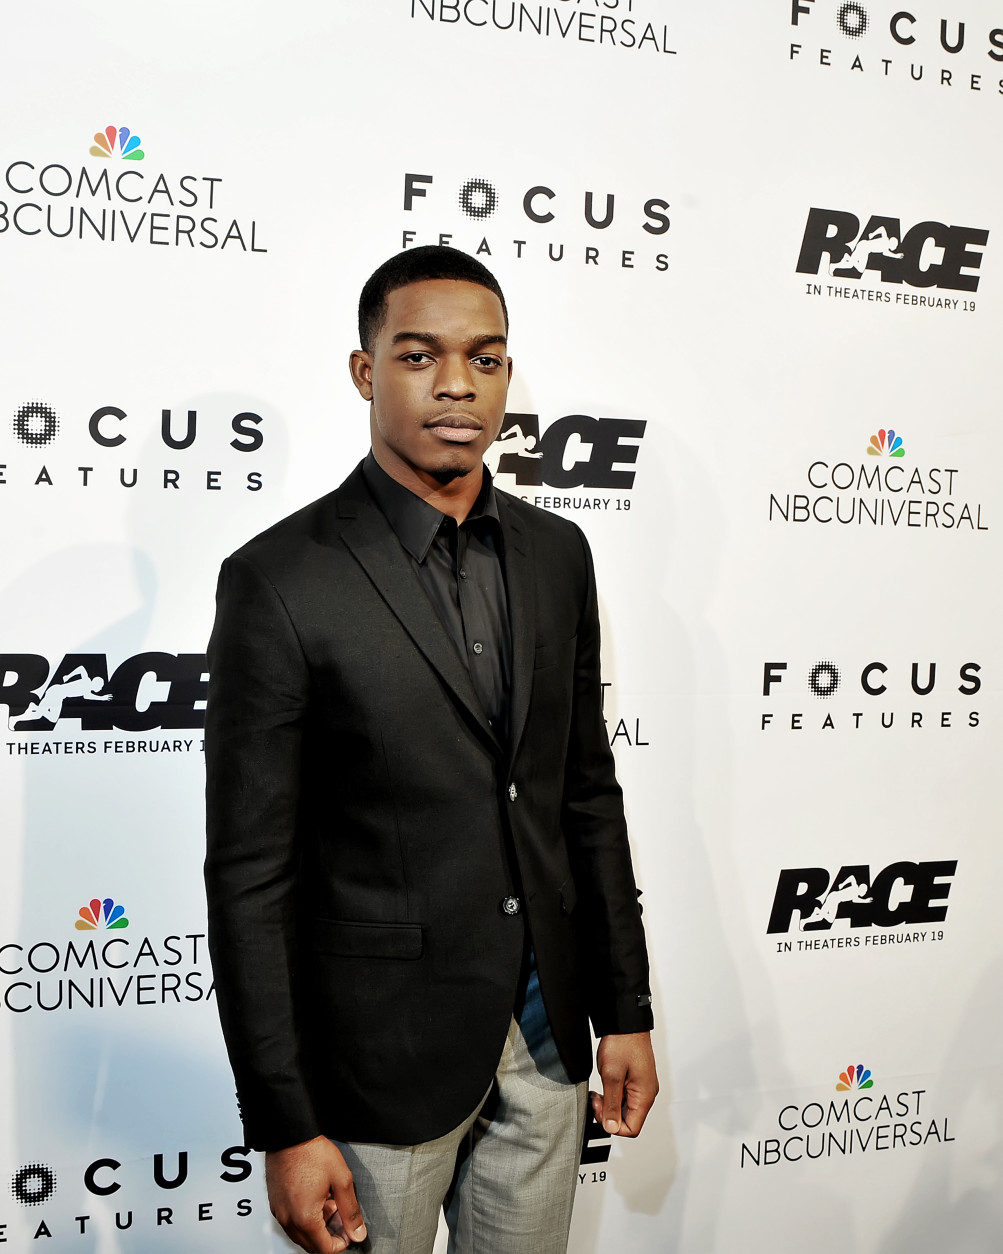 Actor Stephan James is pictured here at the Feb. 3, 2016 screening of "Race." (Courtesy Shannon Finney, www.shannonfinneyphotography.com)